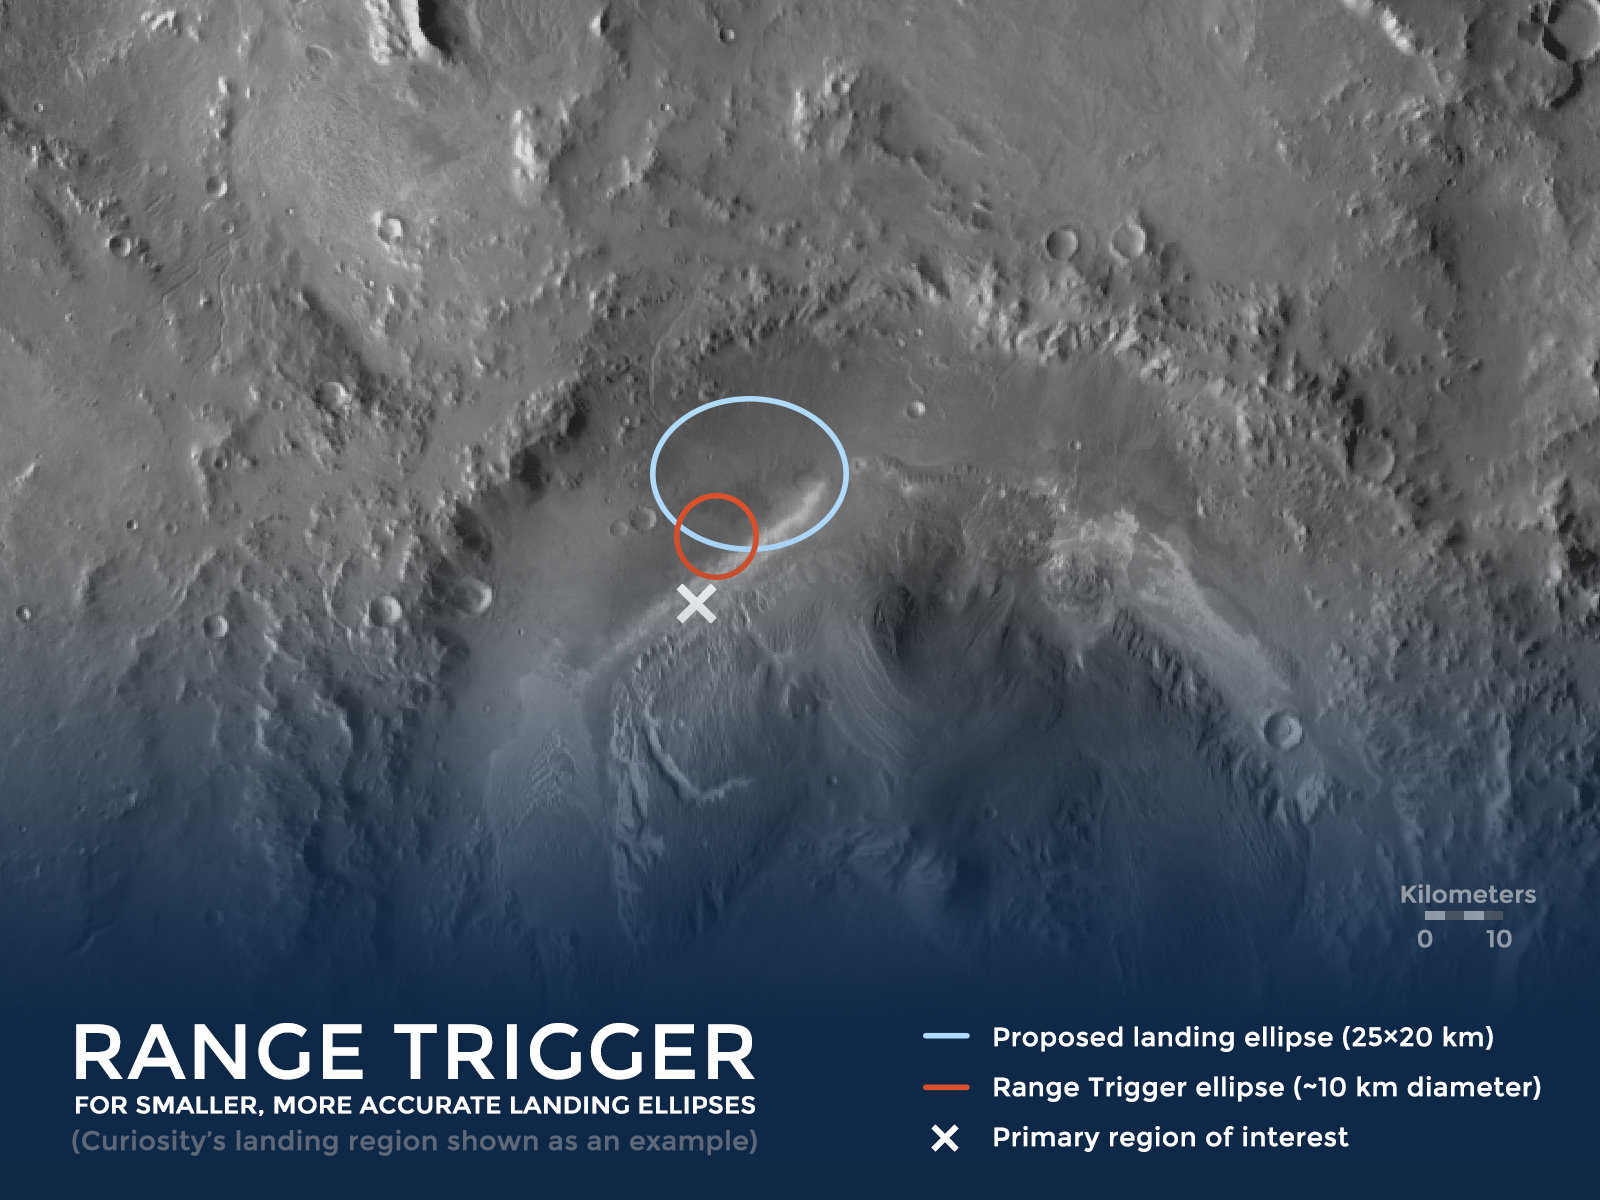 Overhead view of Mars with a comparison of the smaller landing ellipse made possible by Range Trigger technology